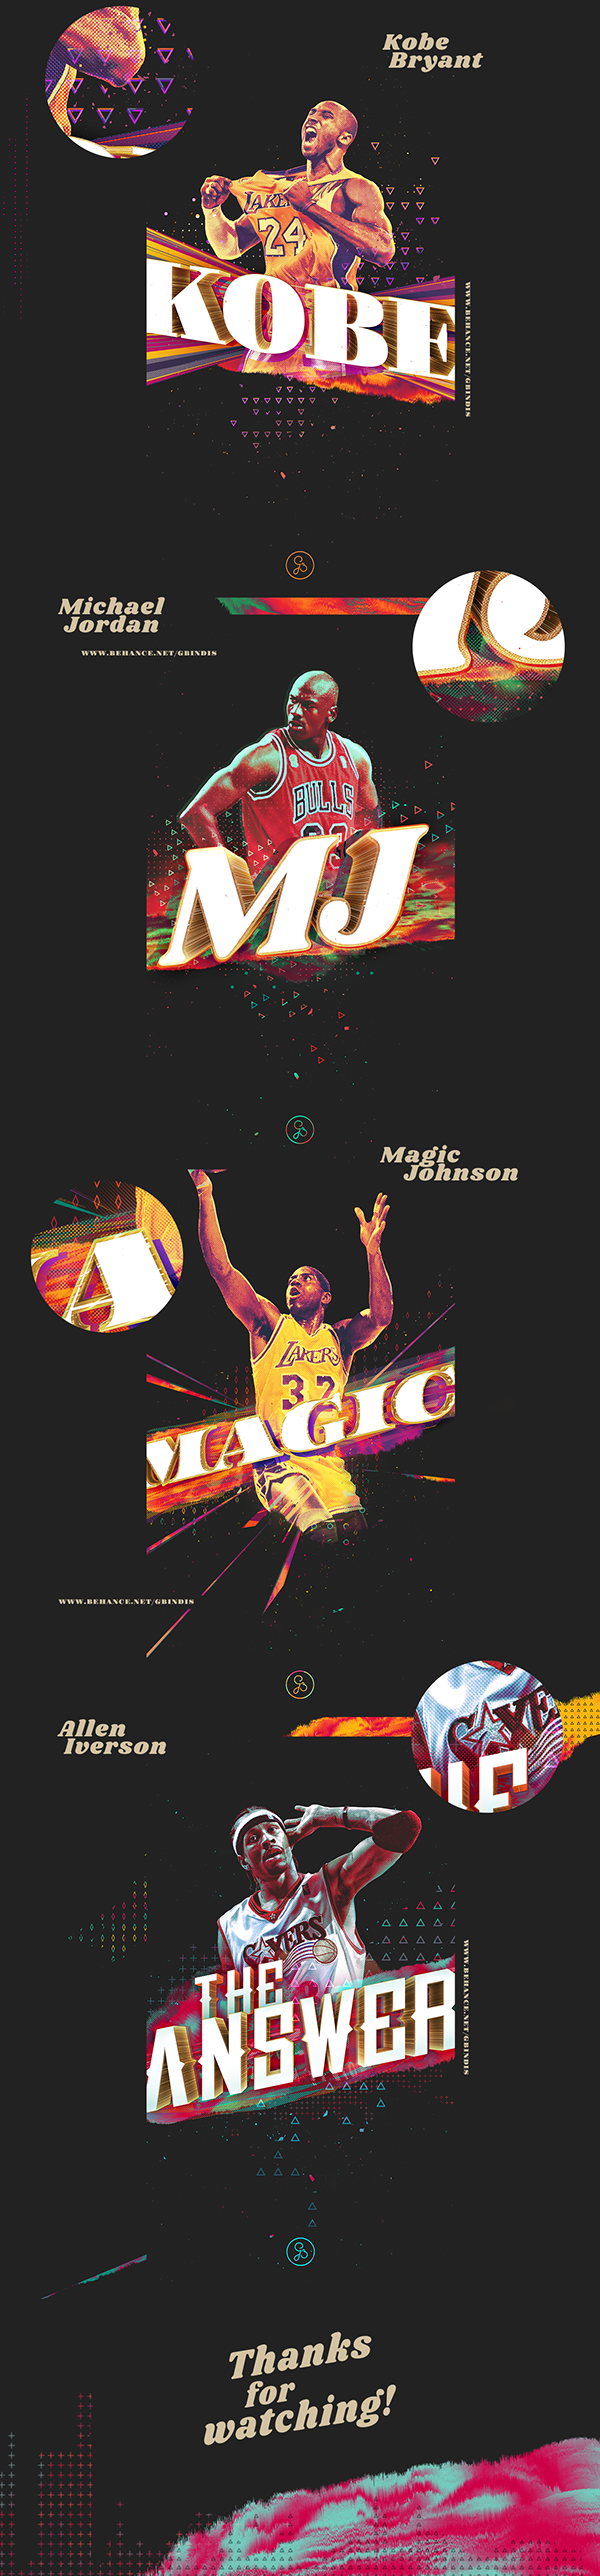 The Magnificent 7 - NBA Legends mobile wallpapers on Behance